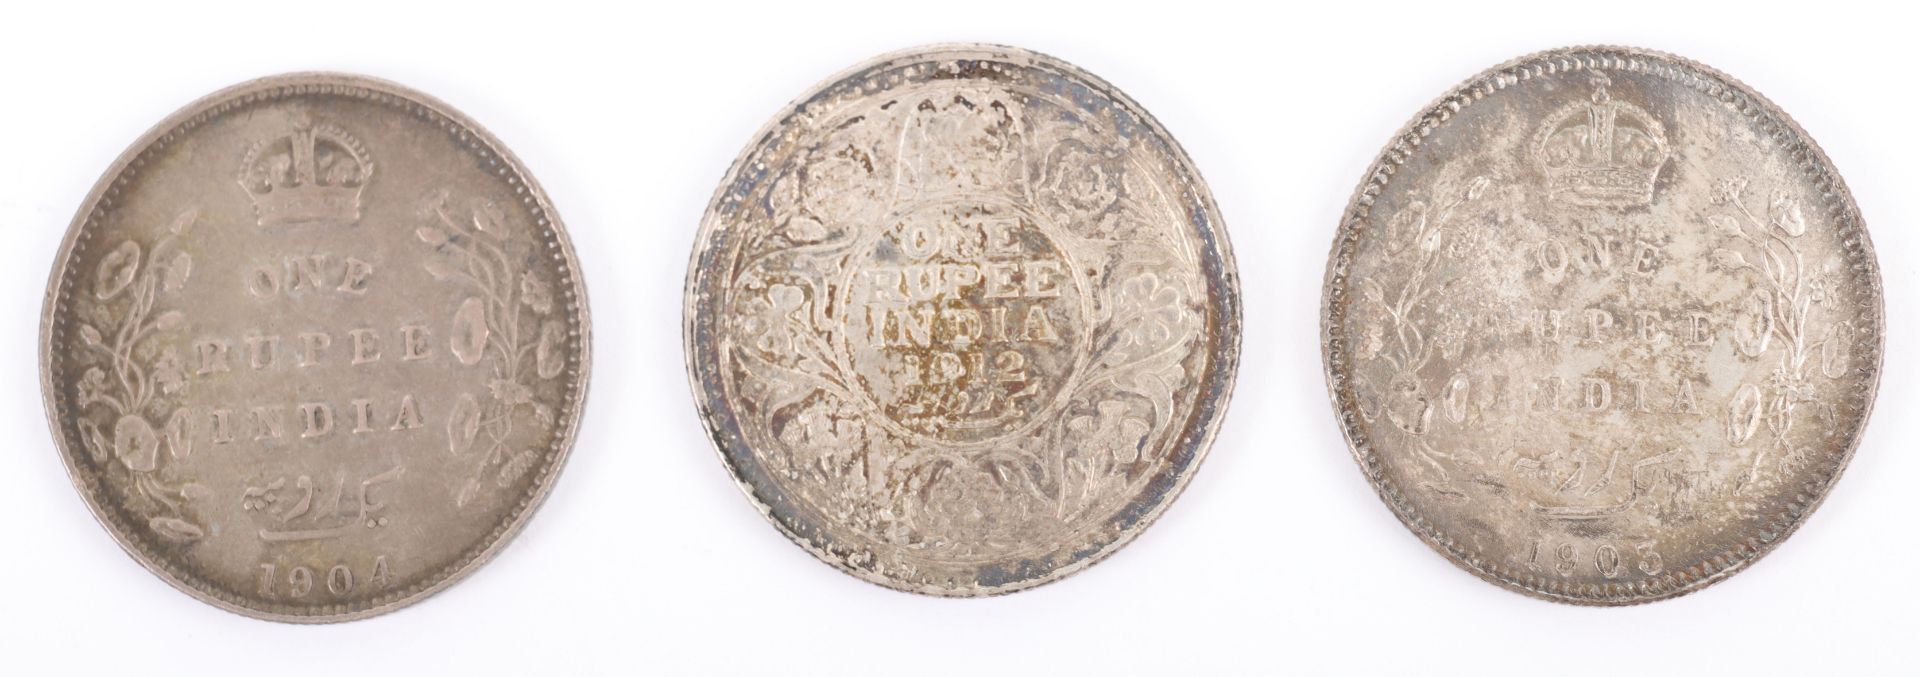 British India, Edward VII (1901-1910), One Rupee, 1903 and 1904, and a George V 1912 - Image 2 of 2